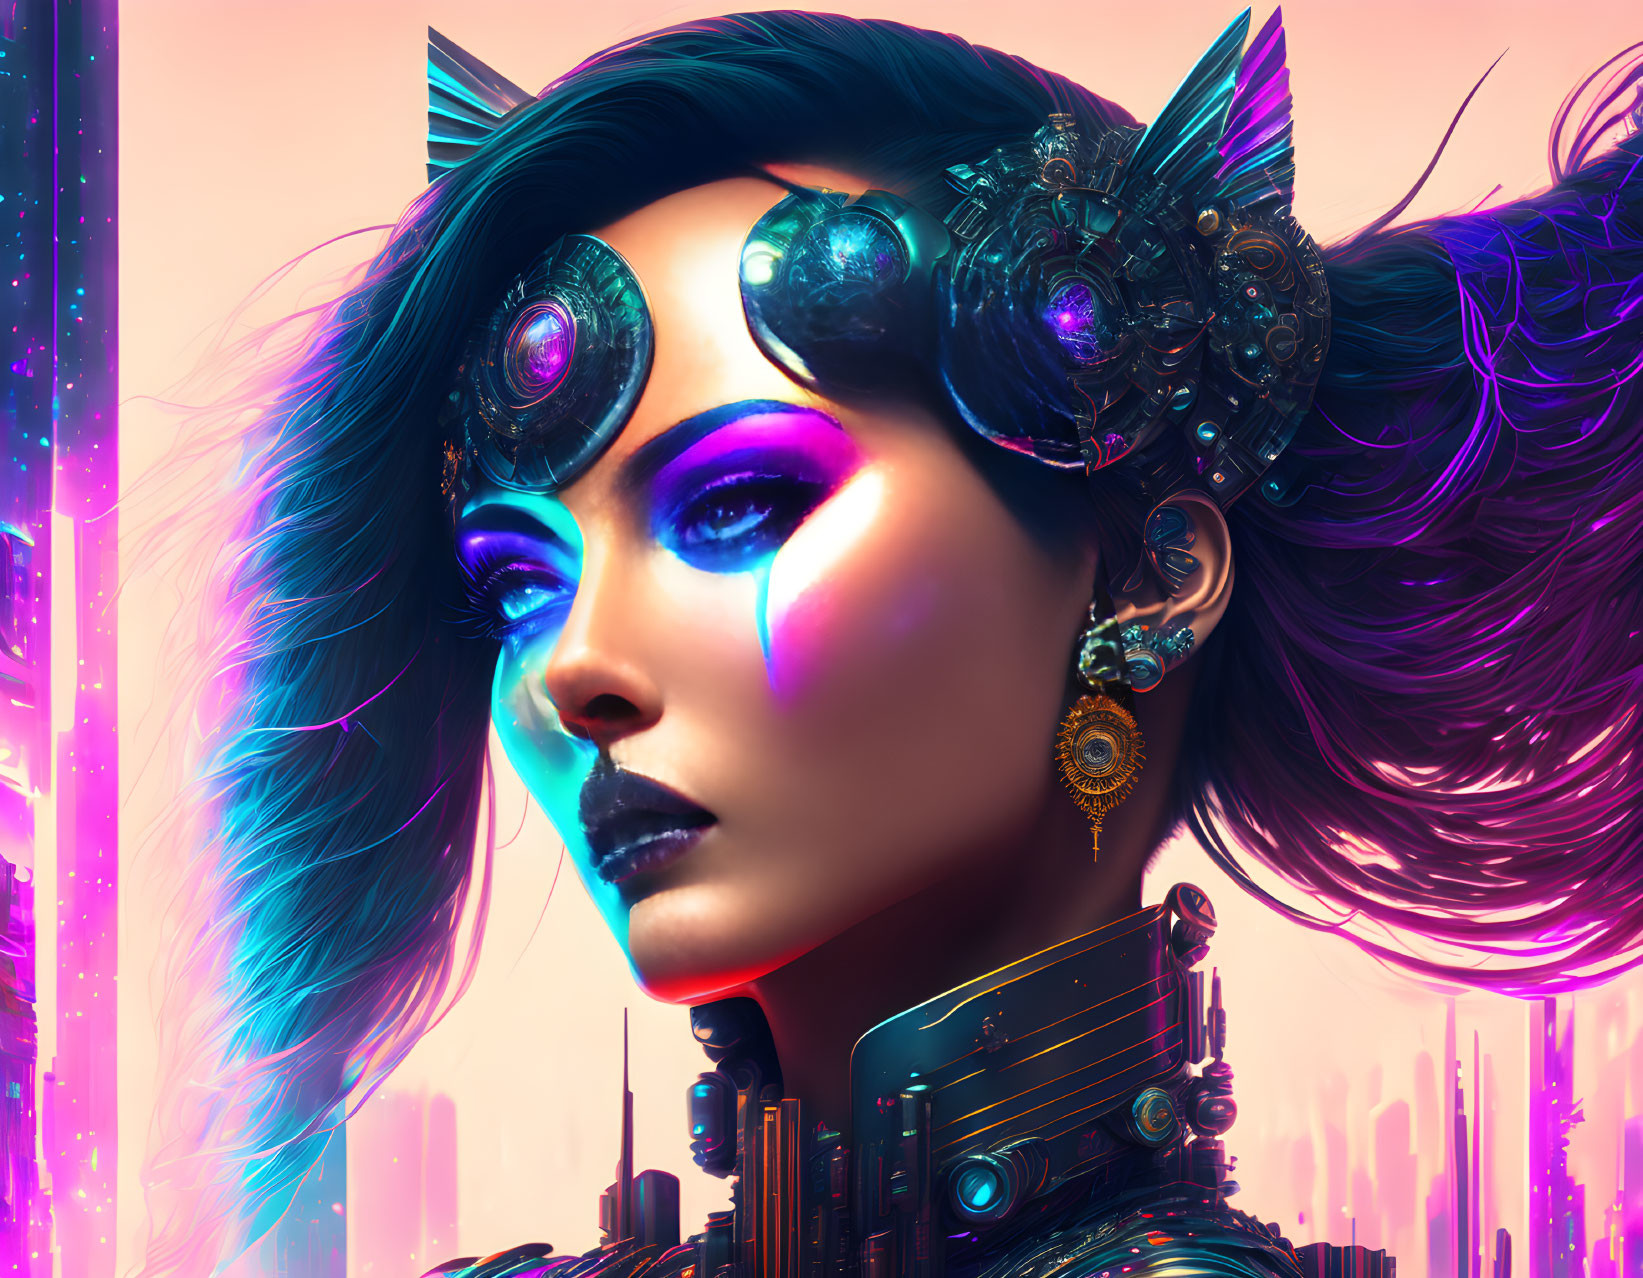 Futuristic female cyborg with blue hair and glowing lights in neon cityscape